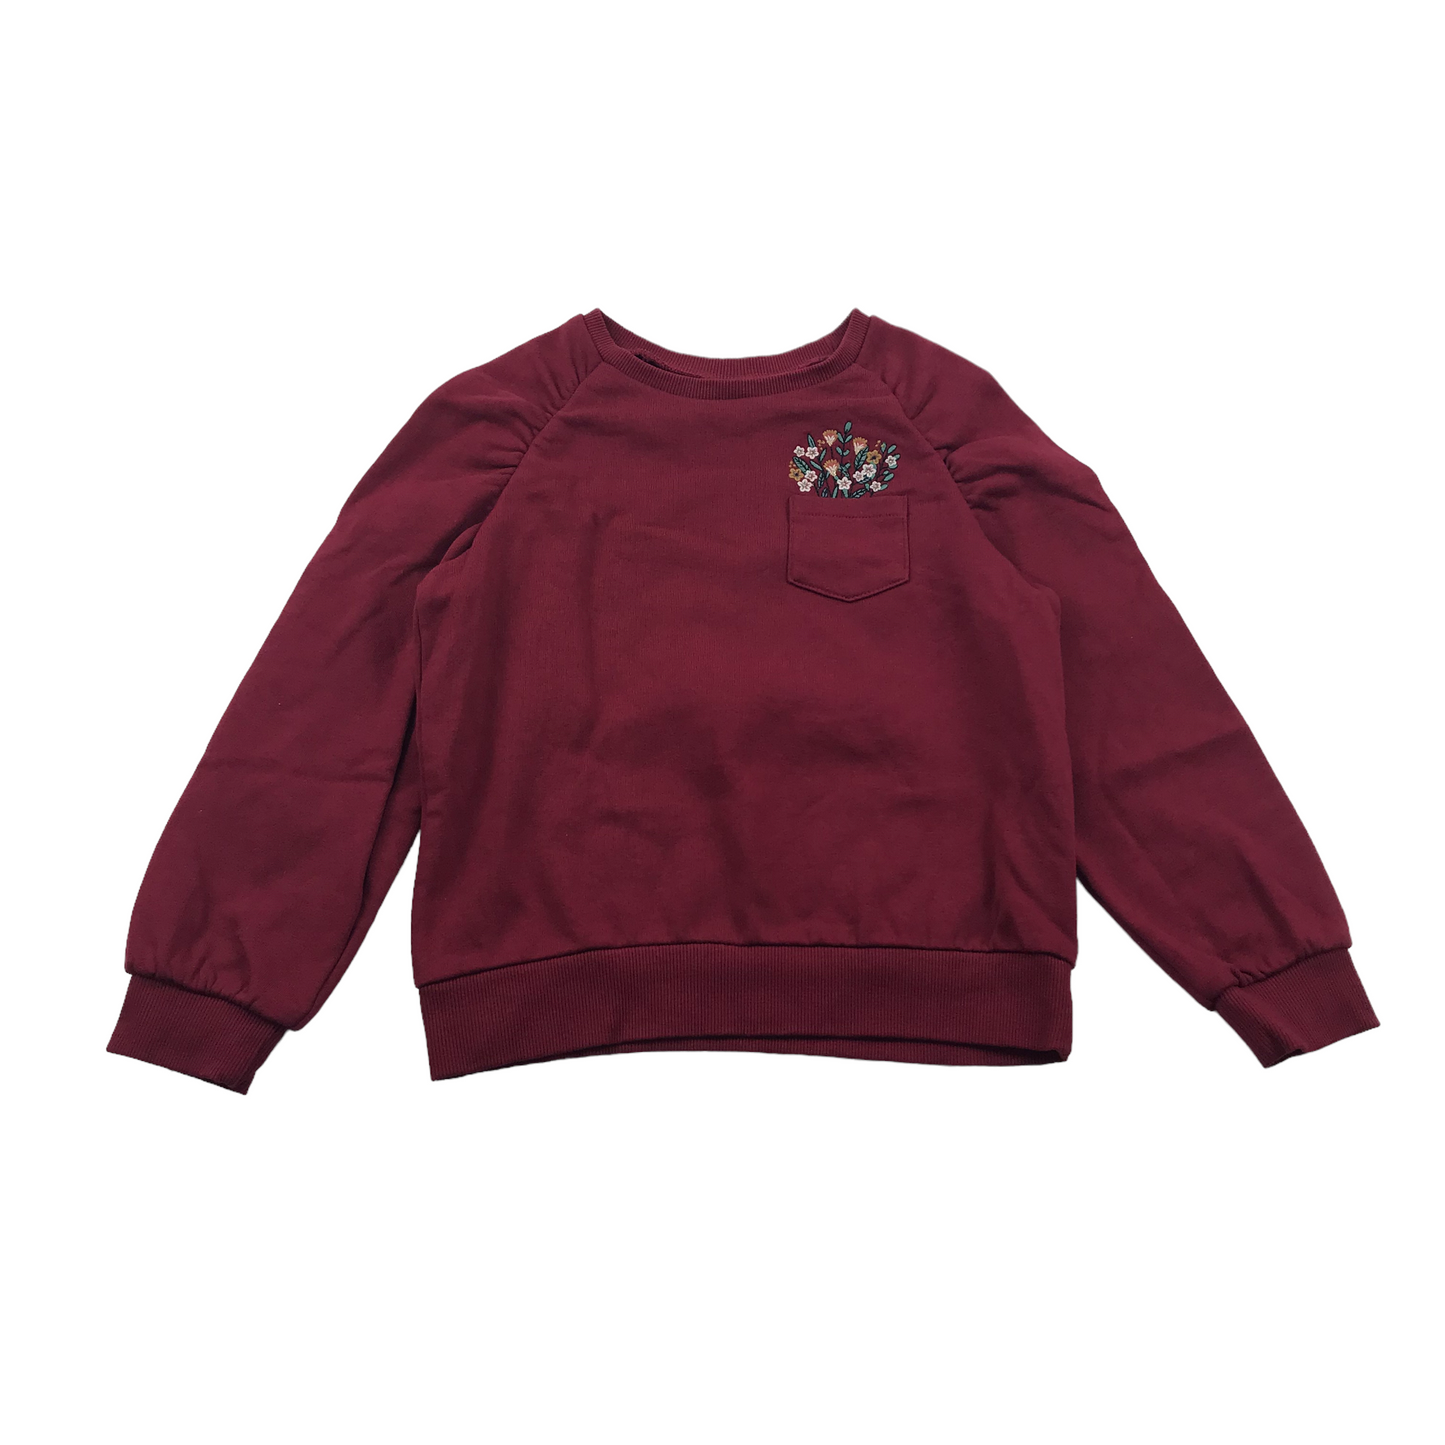 Tao Burgundy Floral Embroidery Sweater Jumper Age 10